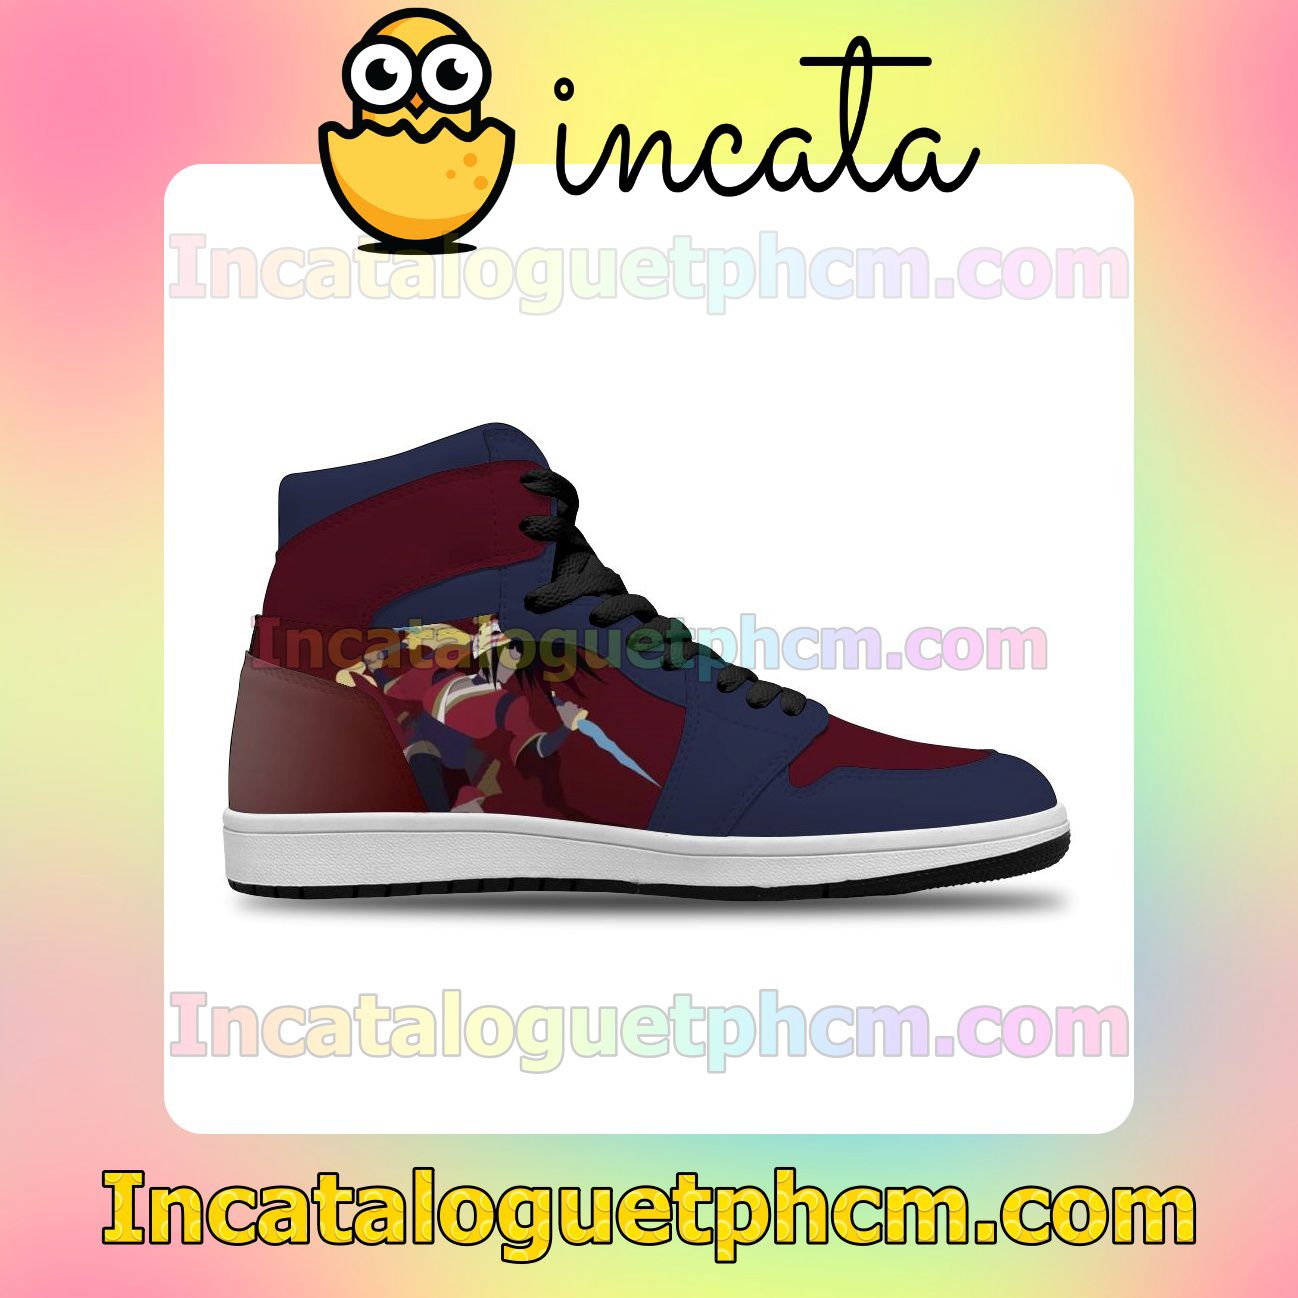 Awesome League of Legends Akali Air Jordan 1 Inspired Shoes